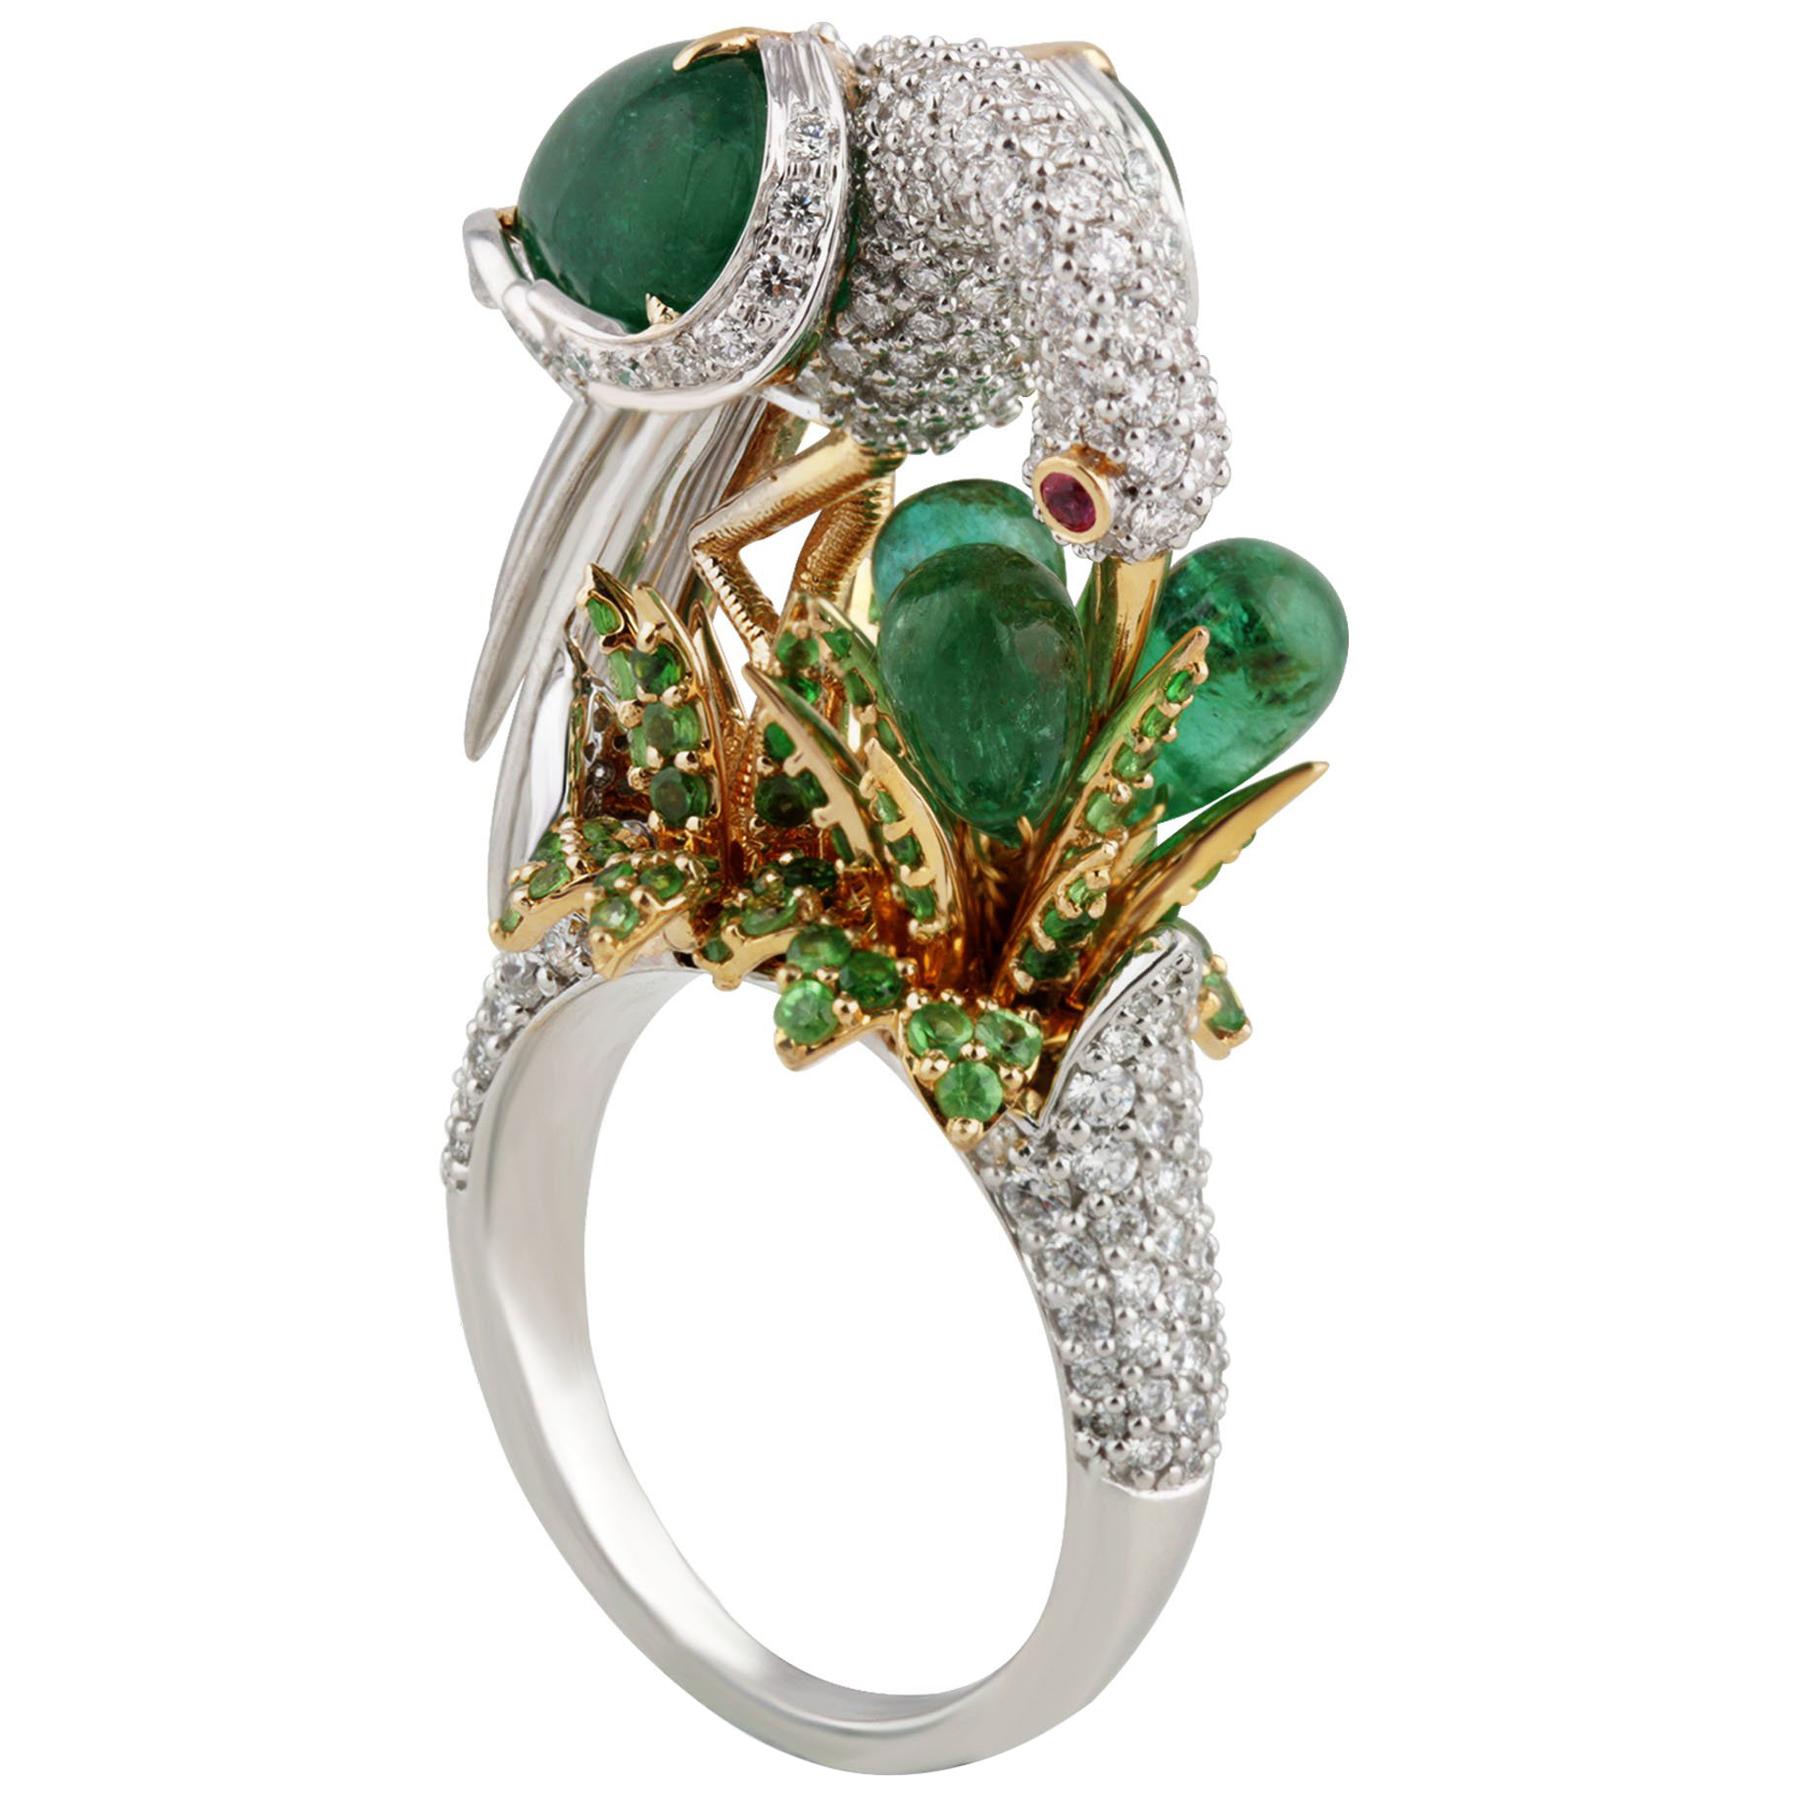 Studio Rêves Crane Ring in 18K Gold and Diamonds with Emeralds and Tsavorites